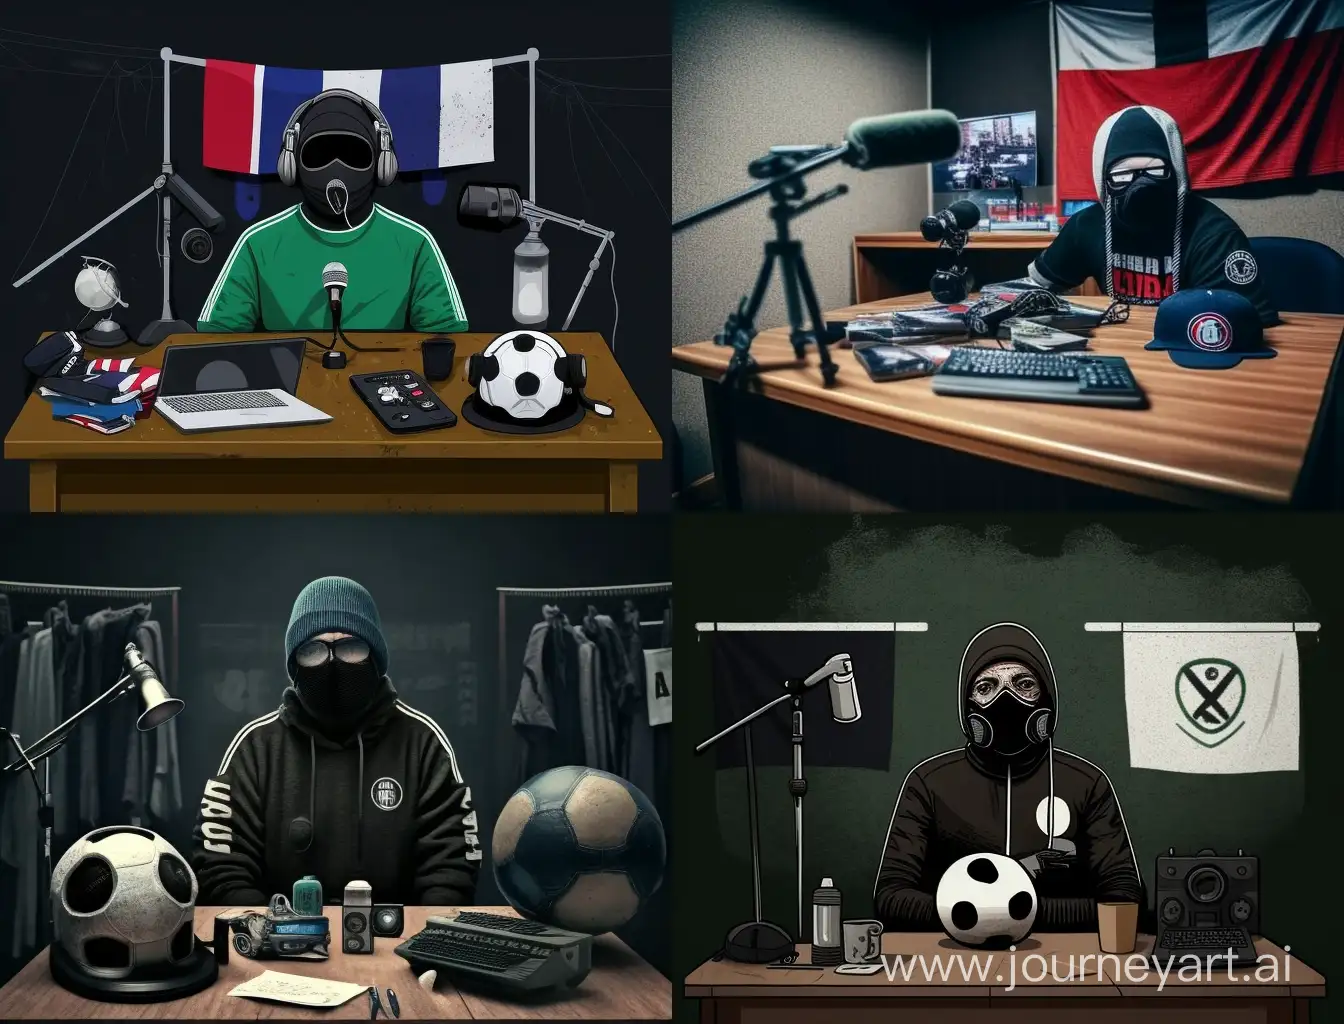 ultras membre with simple balacava set in the desk with old ball of football and baners and staf of supporting and microphones for recording youtube chanell